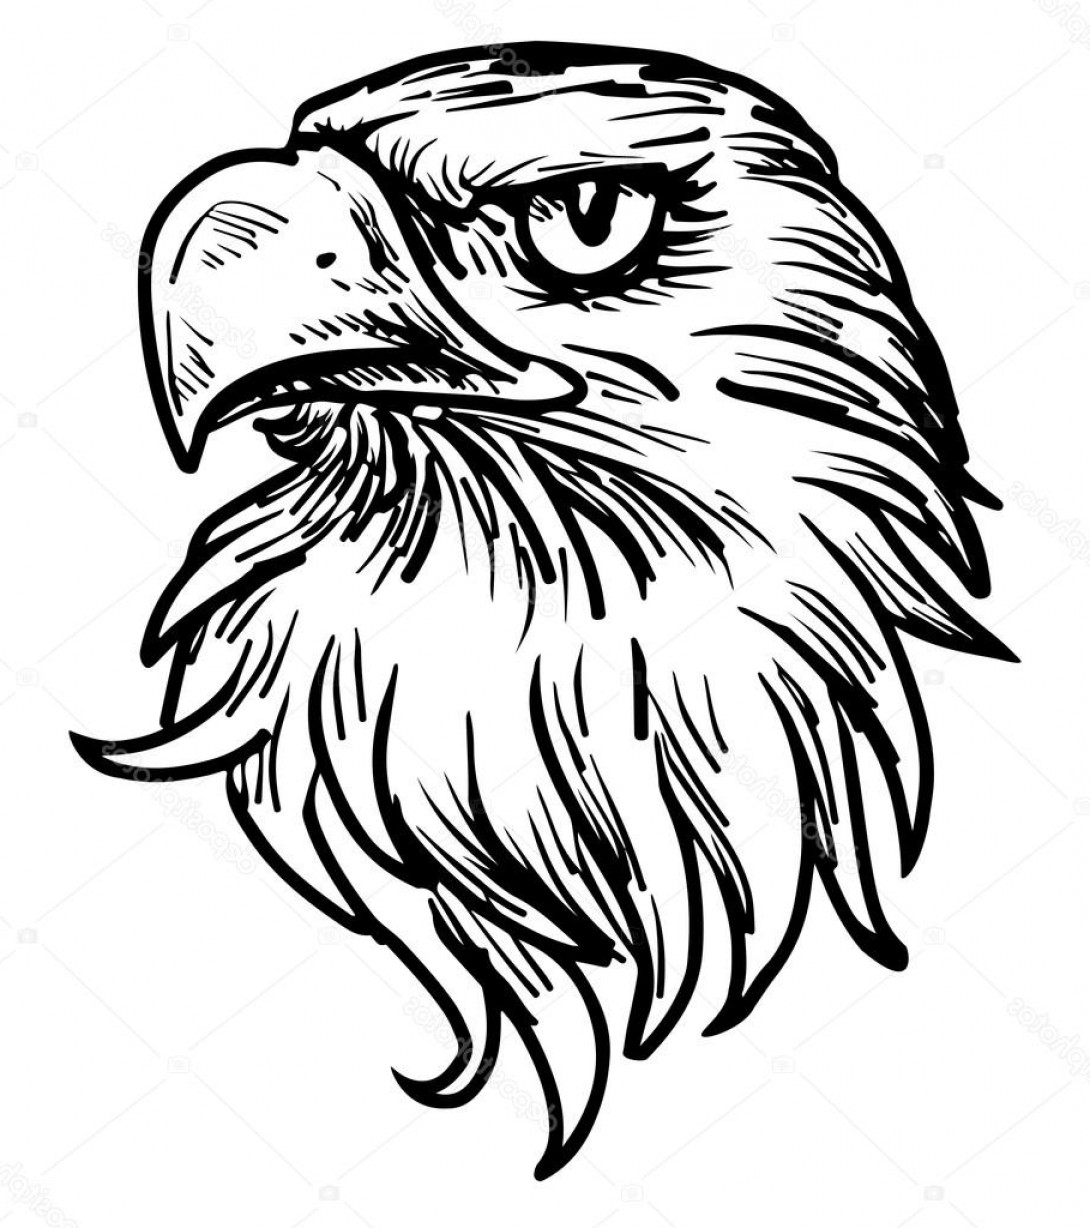 Eagle face drawing.